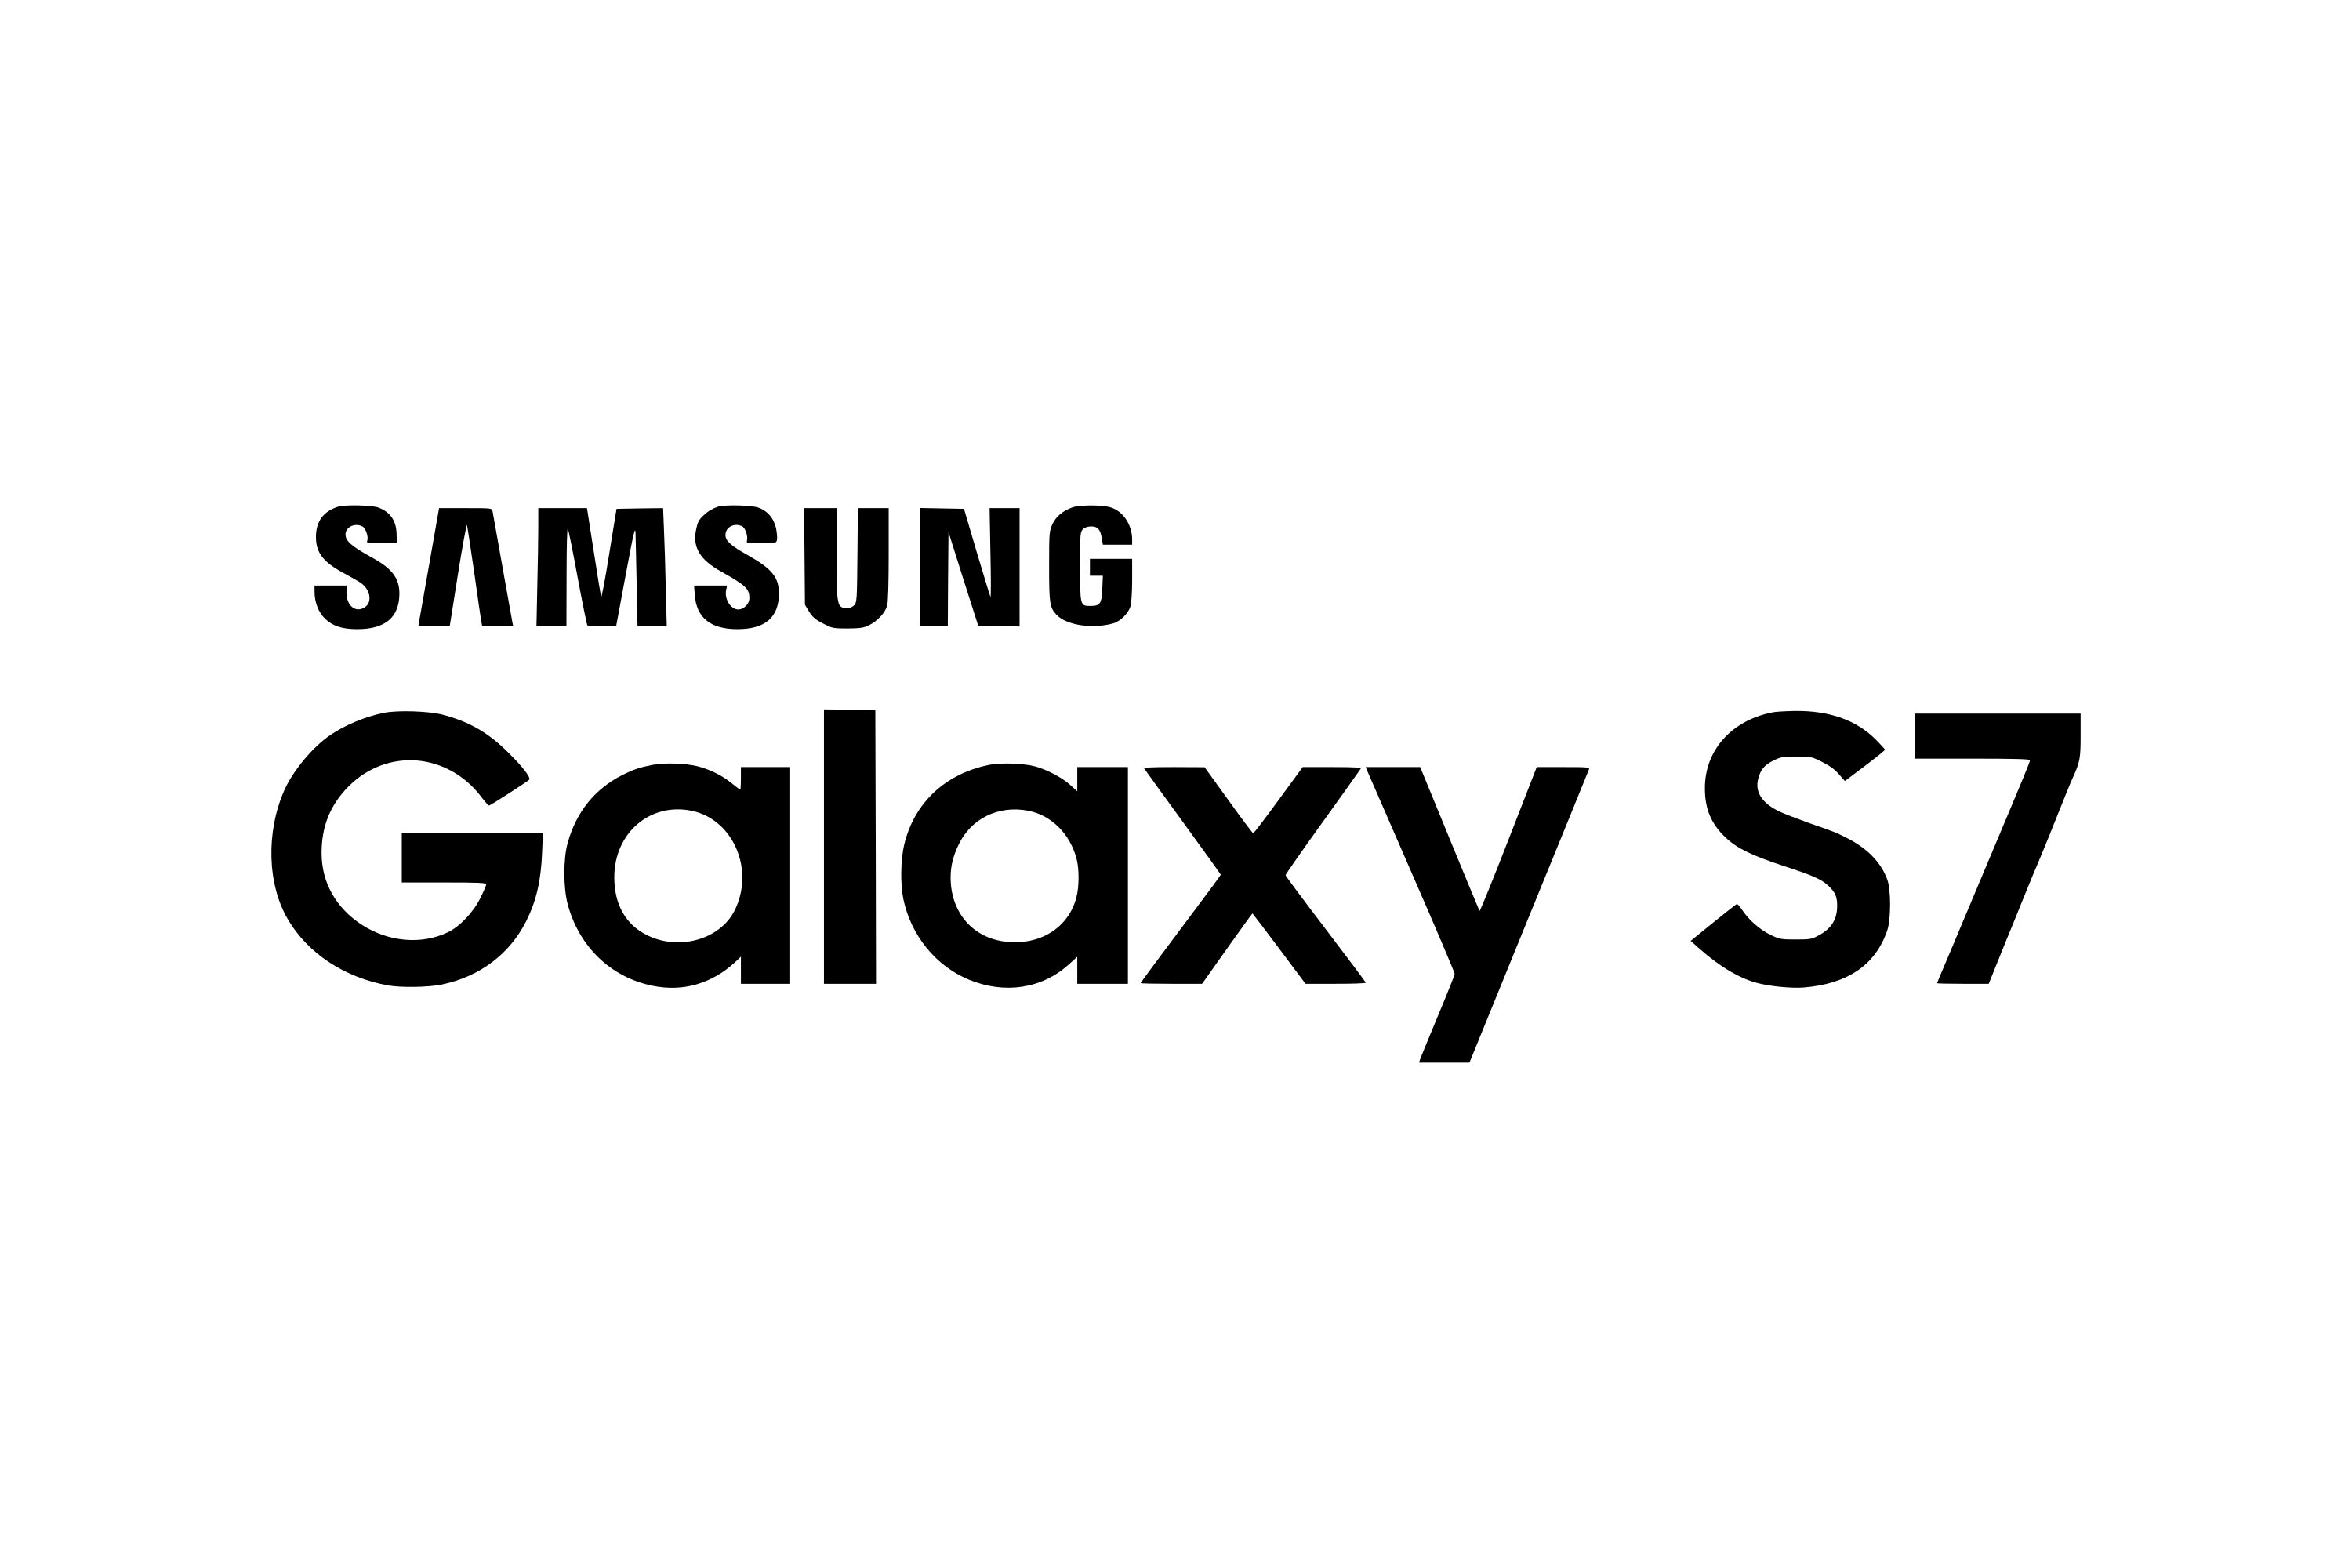 Download Samsung Galaxy S7 Logo in SVG Vector or PNG File Format ...